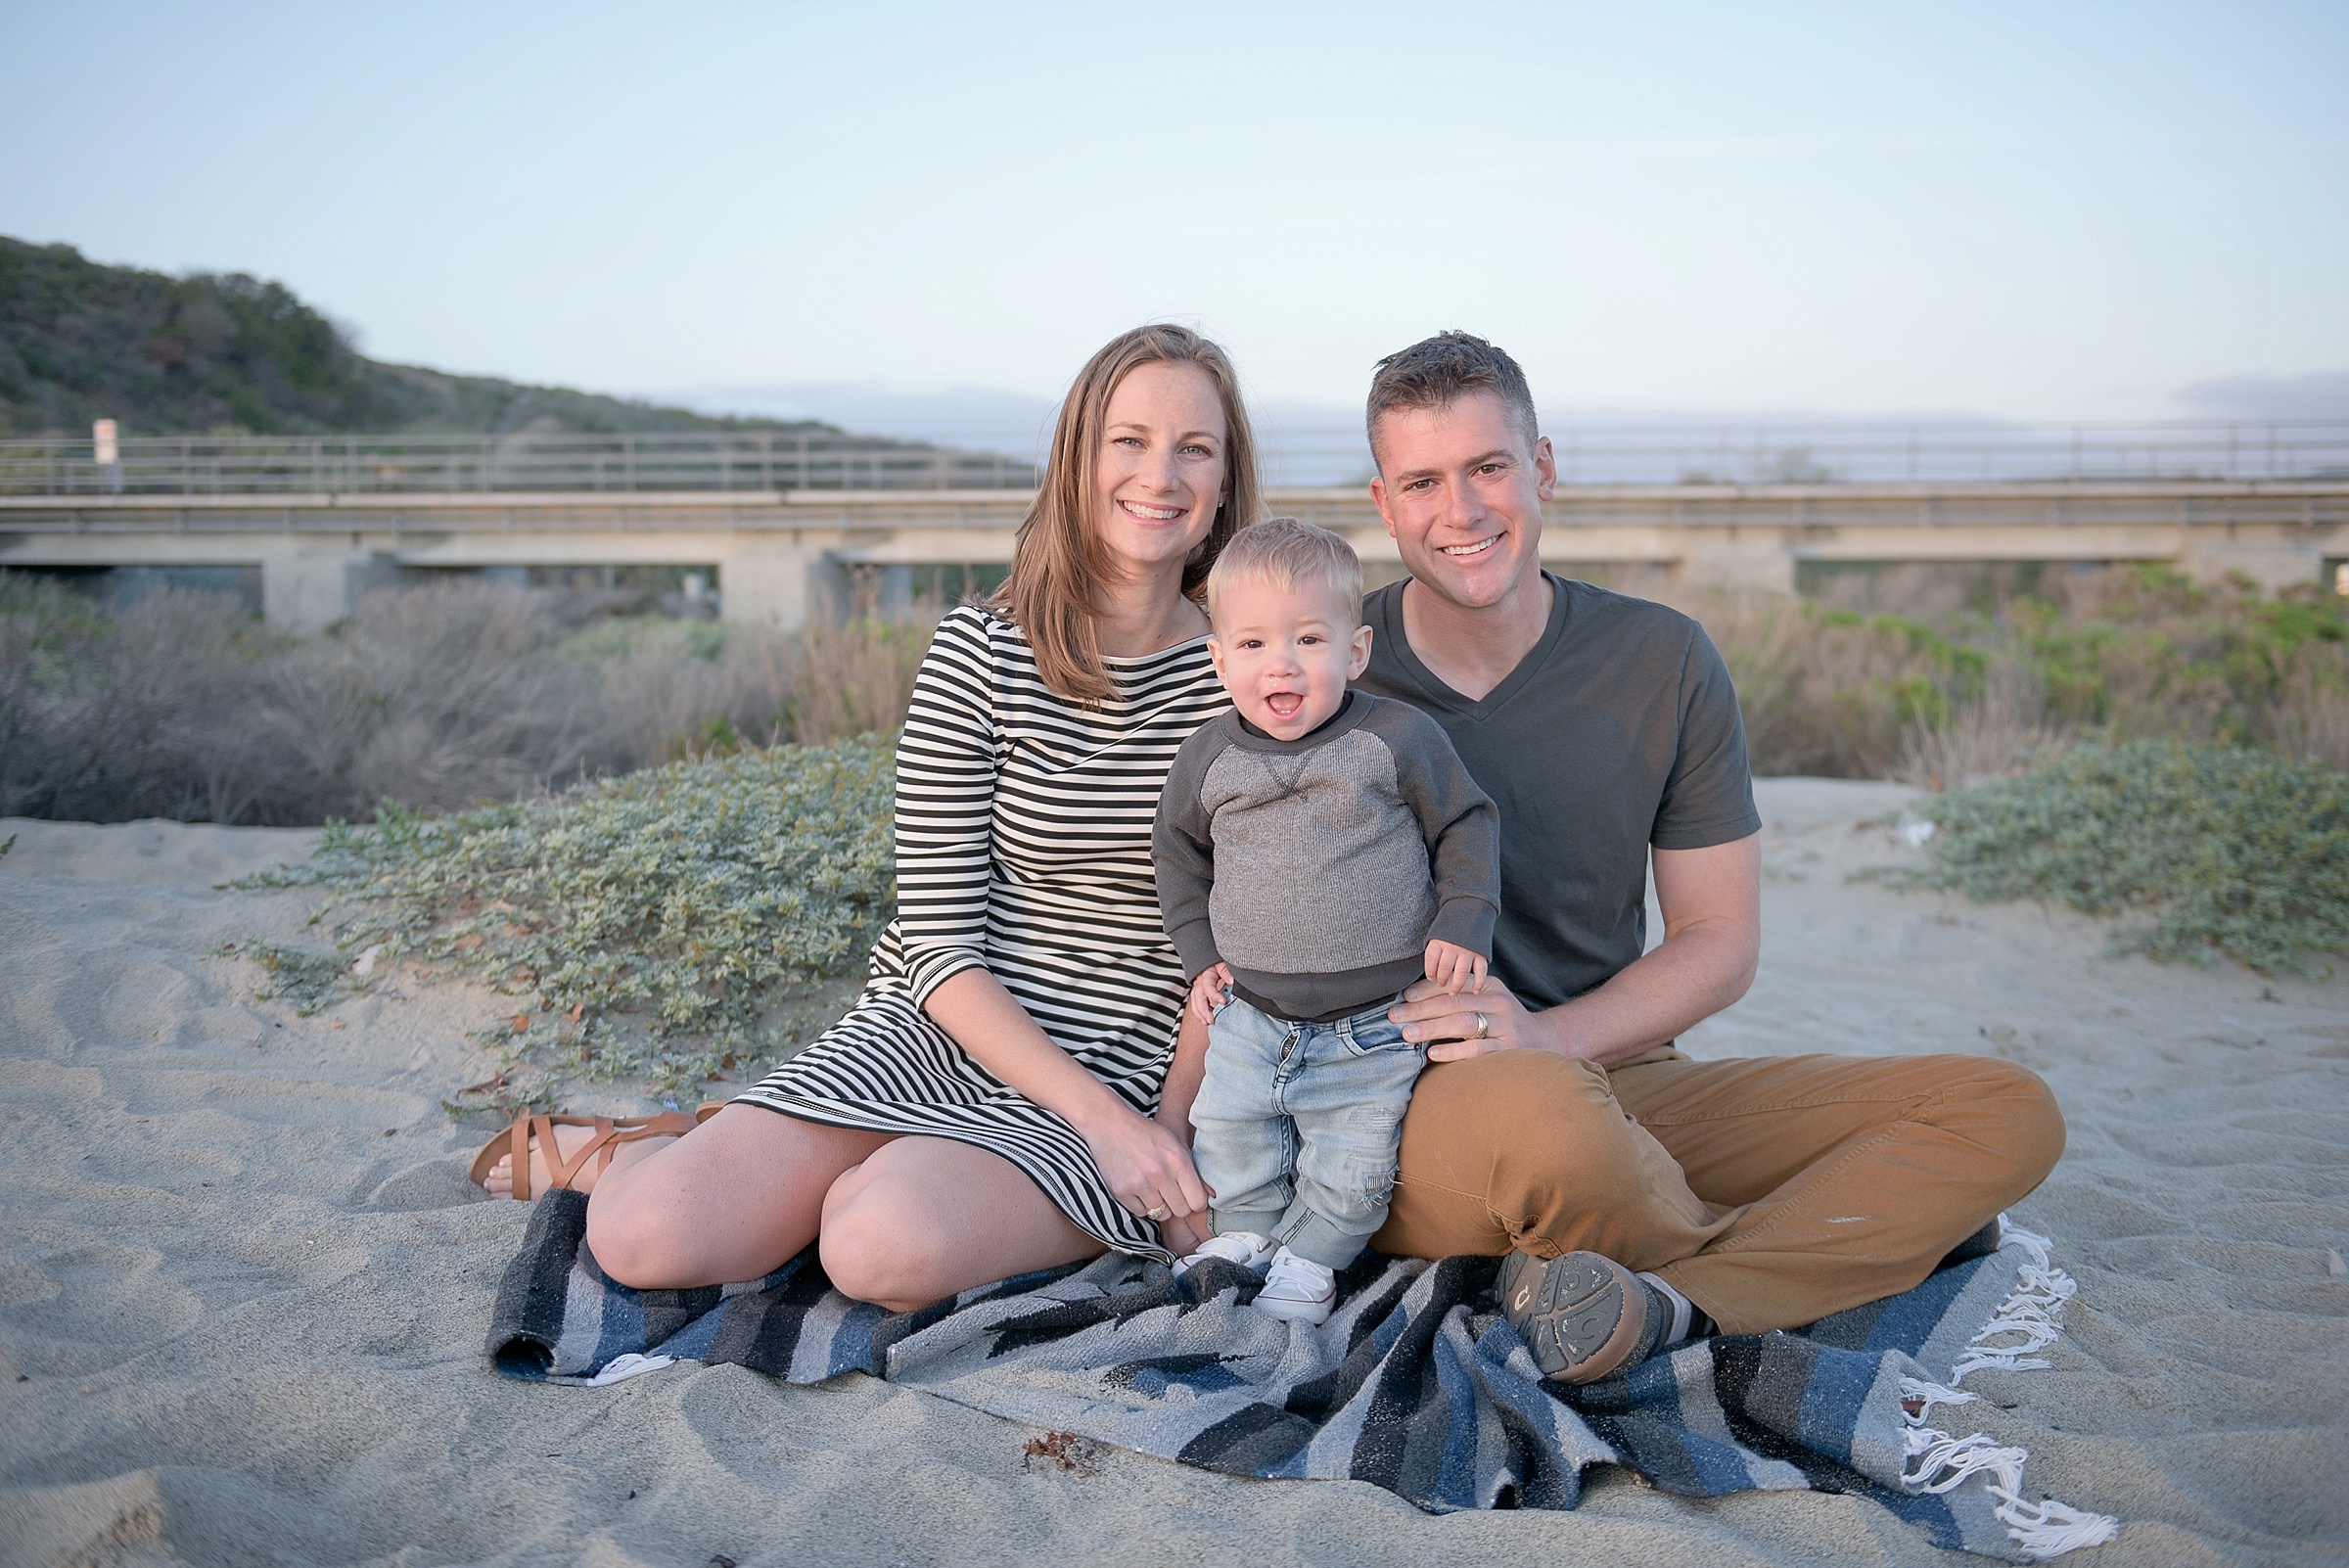 Portrait Session on the beach by North Carolina family photographer Lauren Nygard